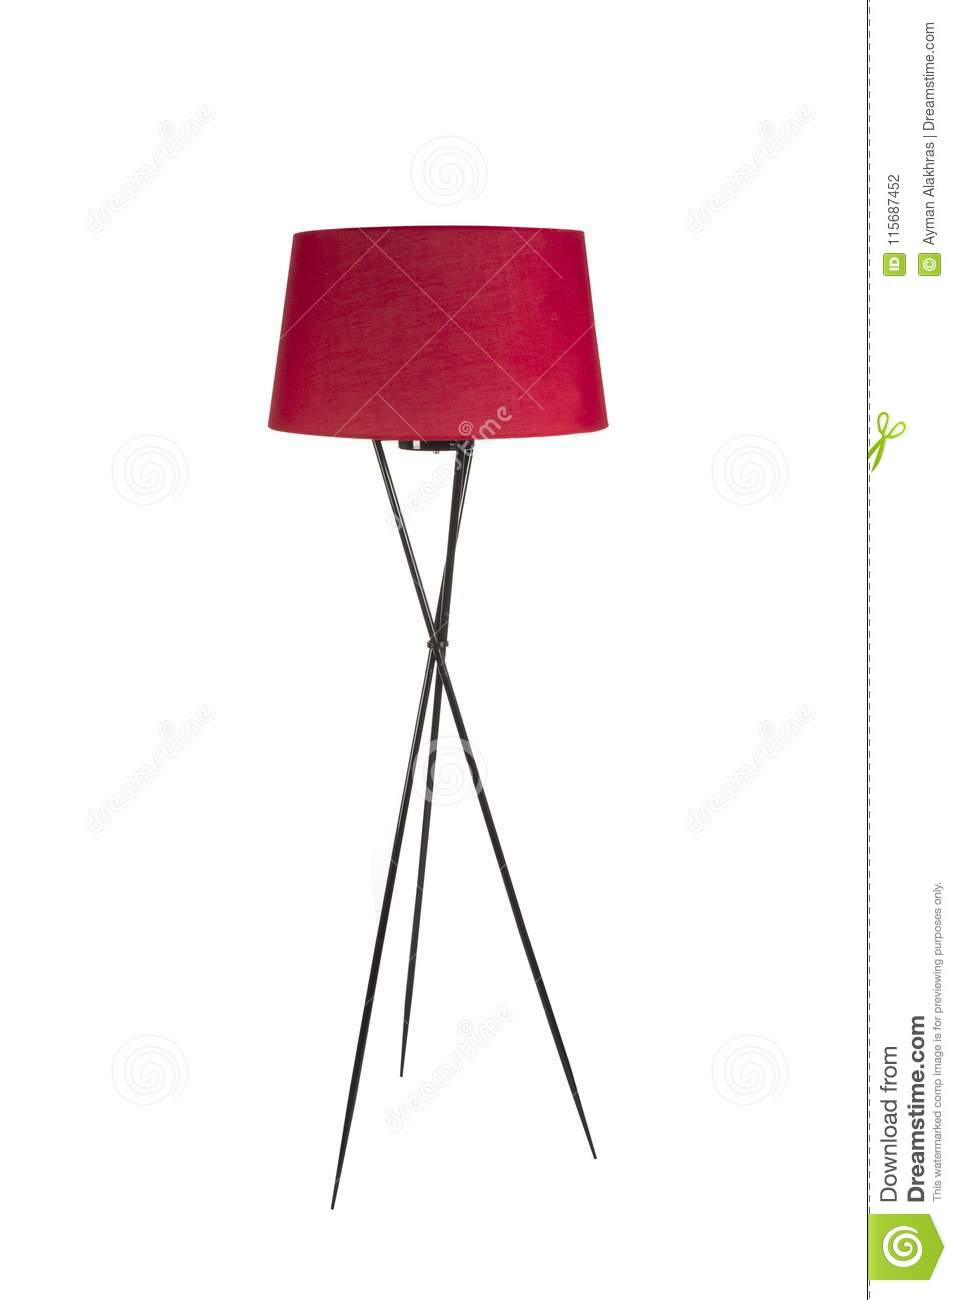 Tripod Red Floor Lamp On White Background Stock Photo inside size 957 X 1300